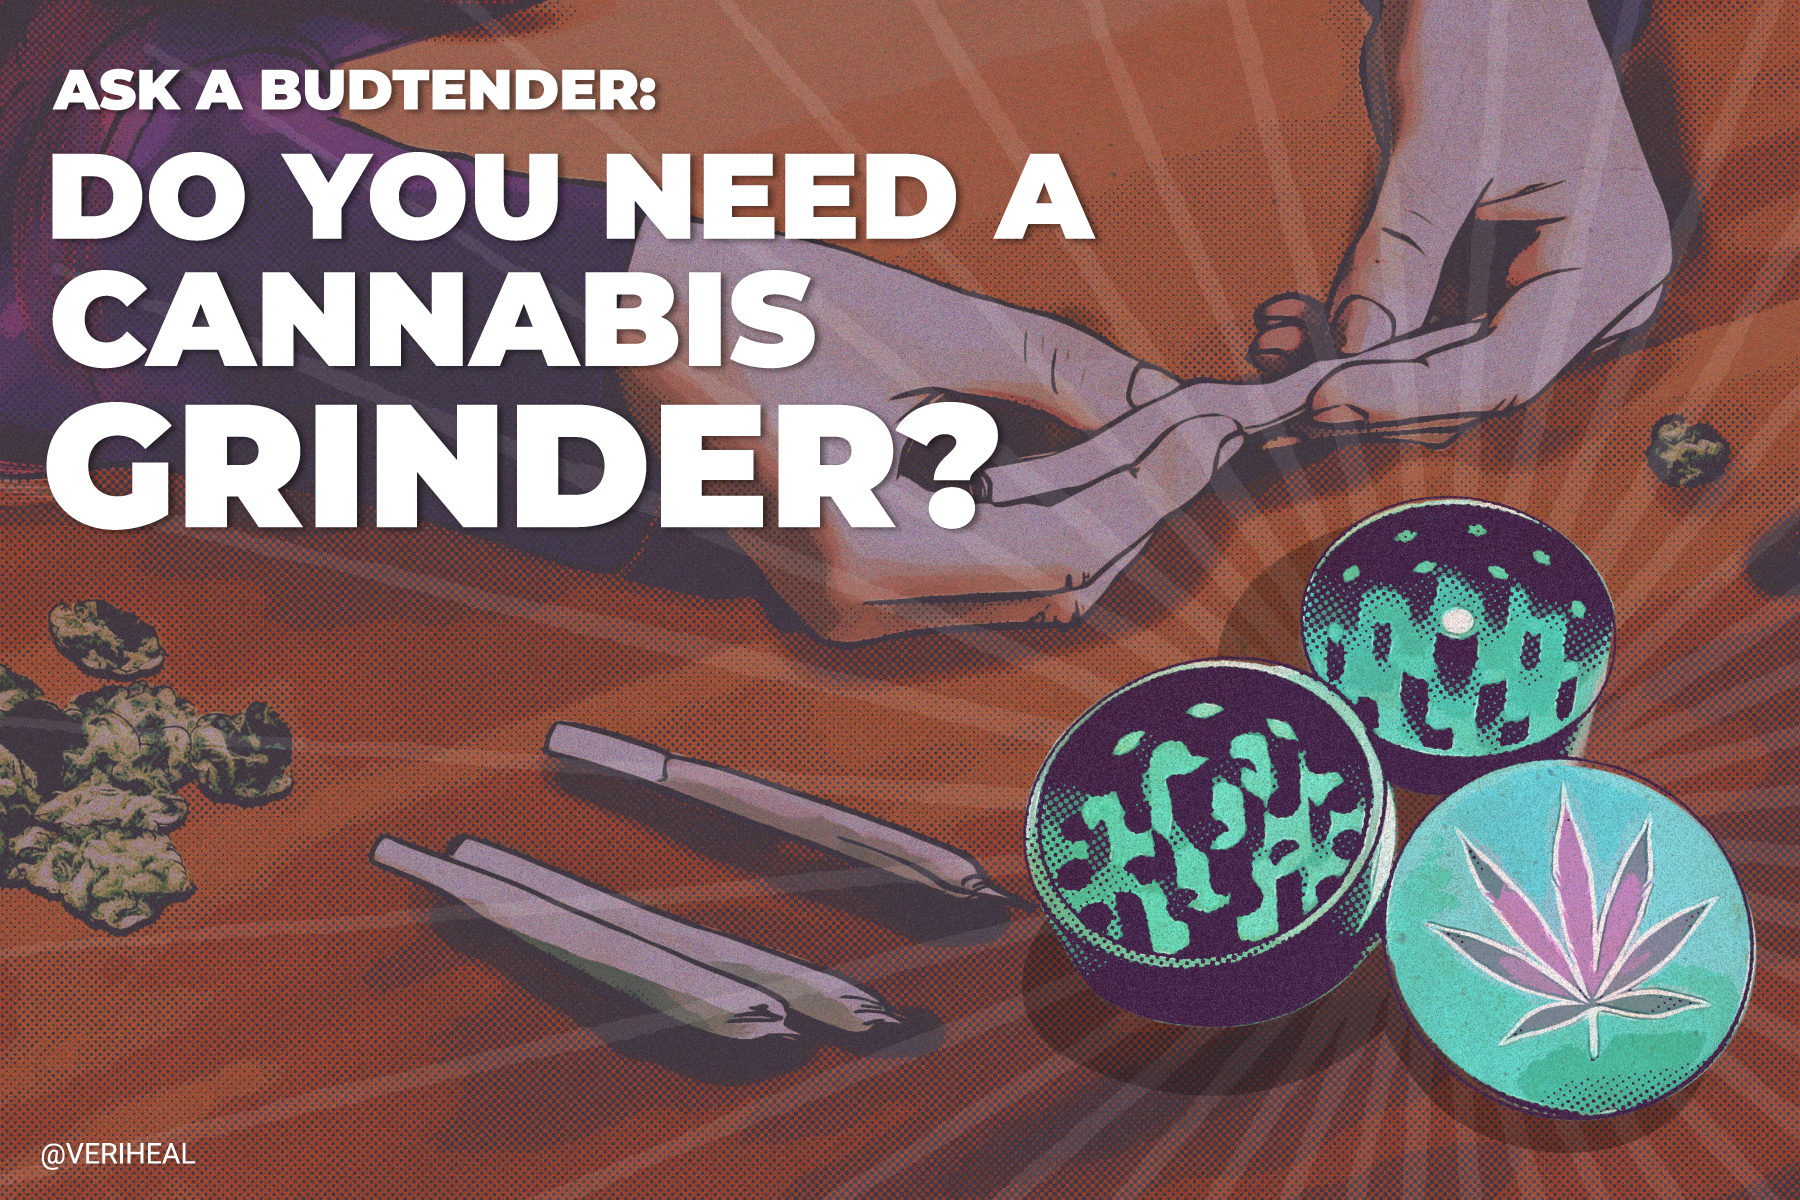 Ask a Budtender: Do You Need a Cannabis Grinder?